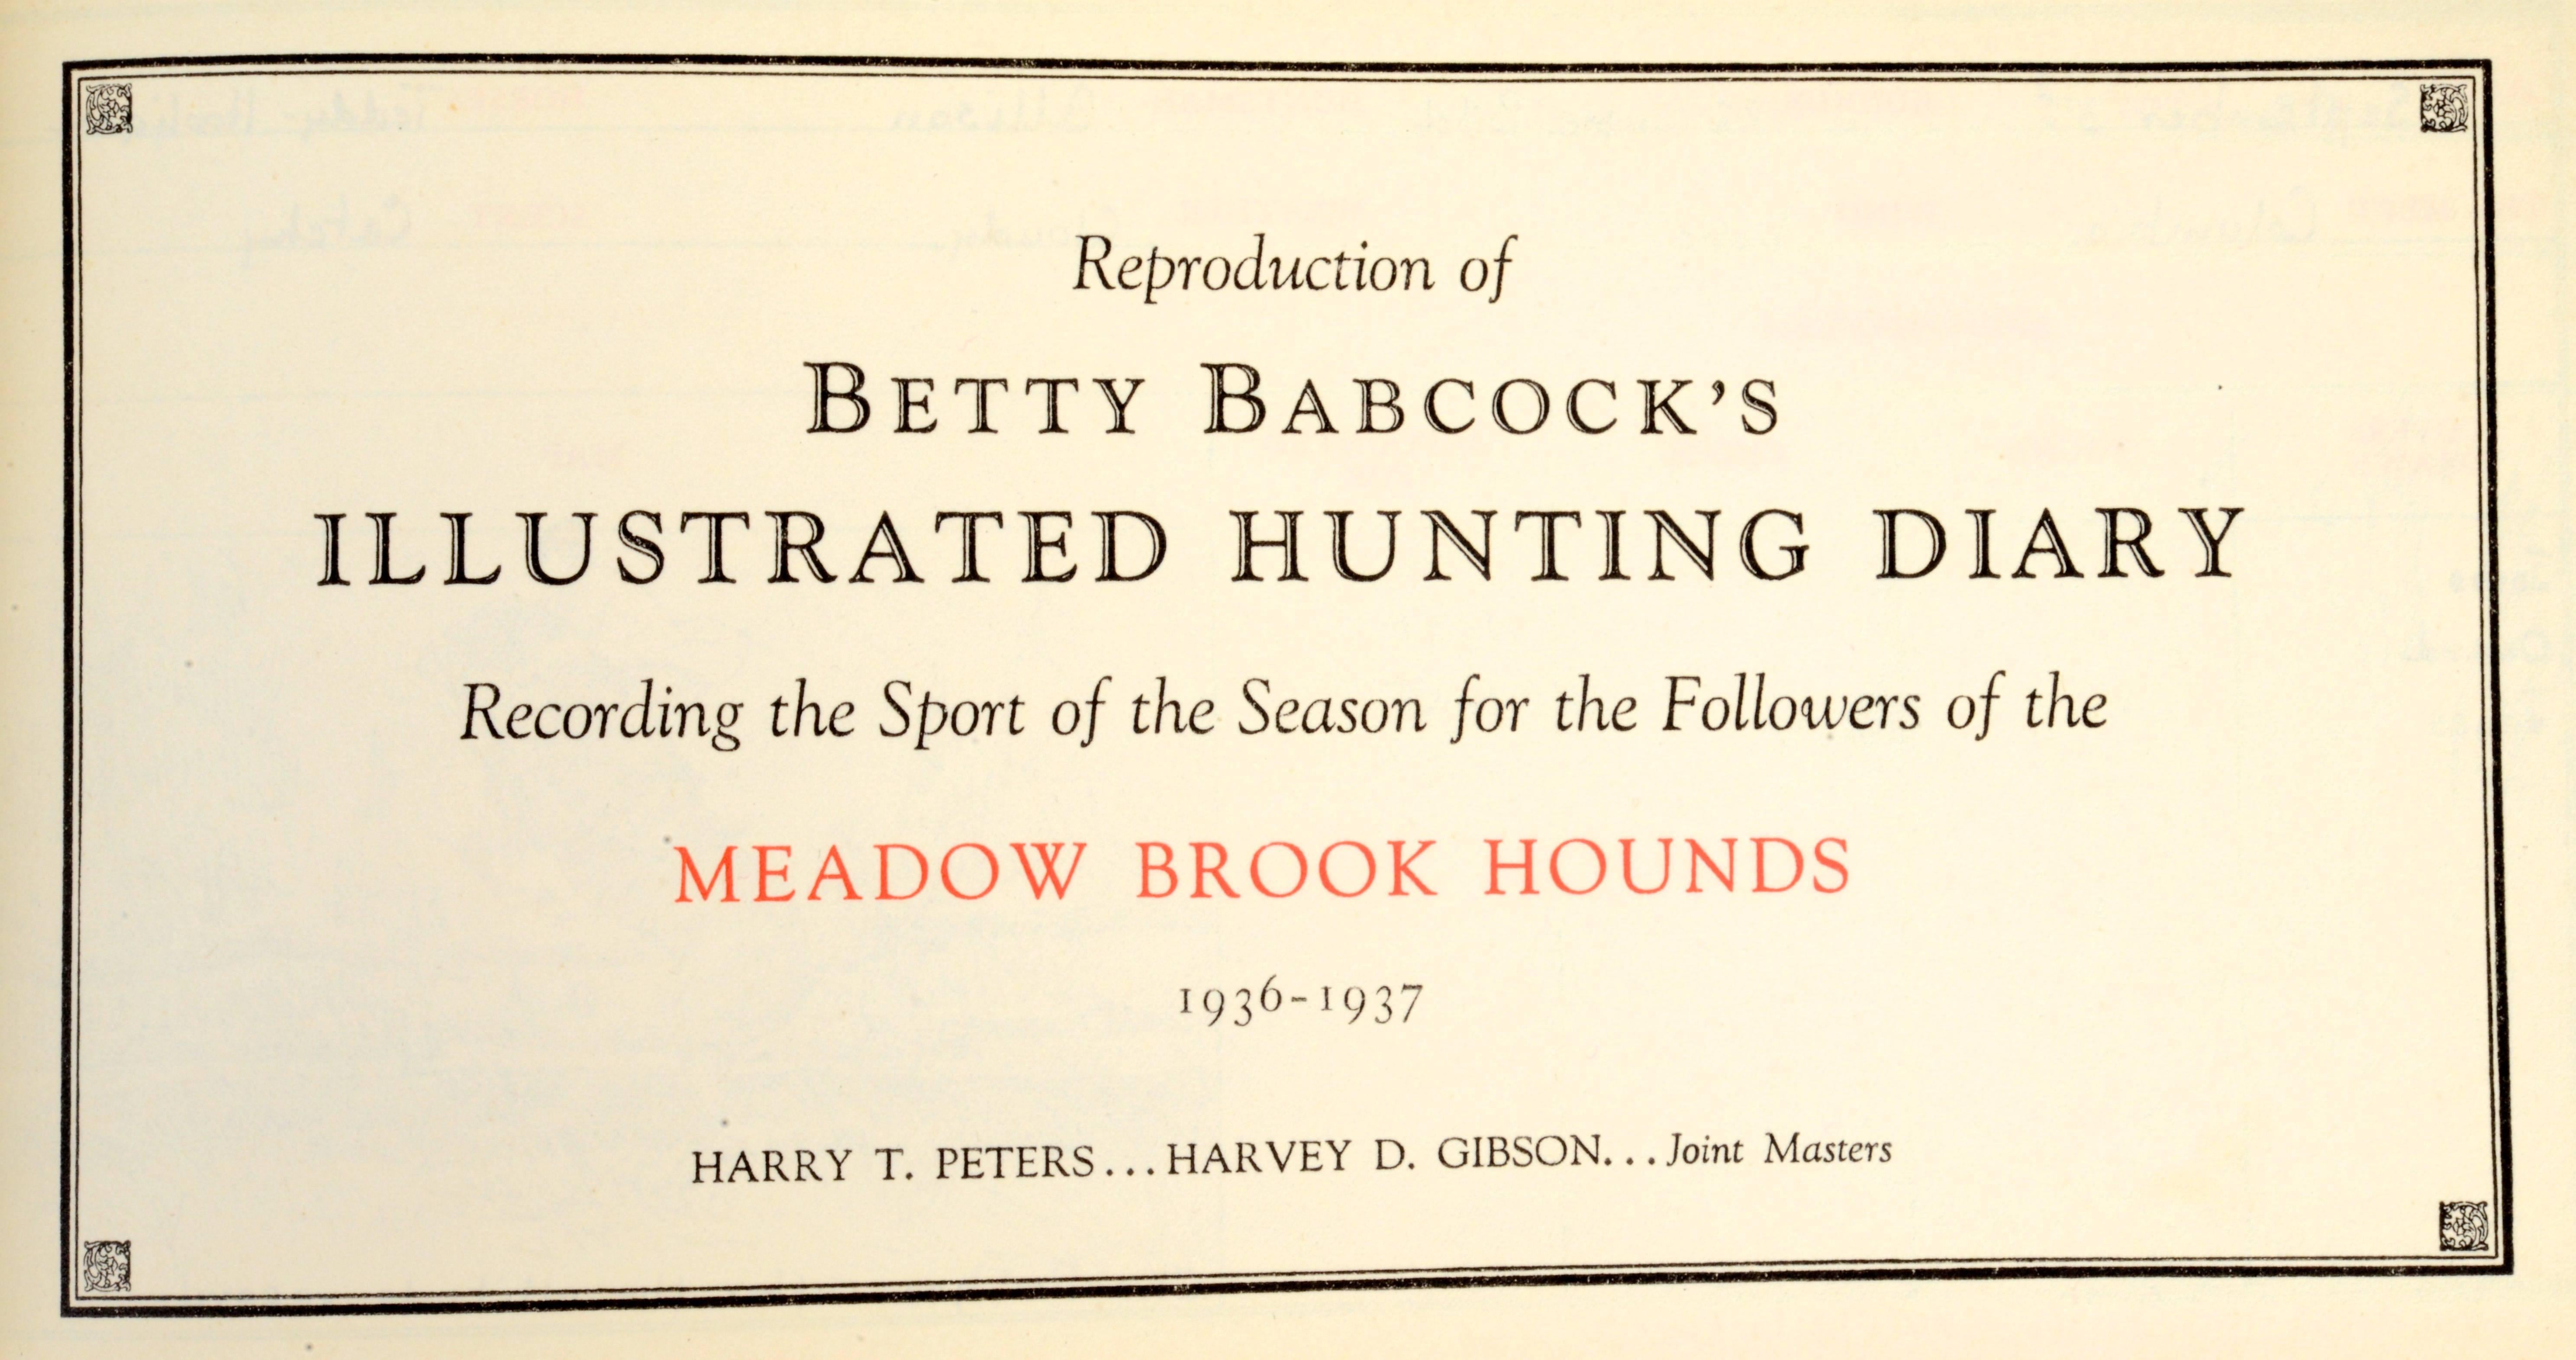 Published New York, 1945. 120 pp. ruled in blue with red printed captions. The Meadow Brook Hounds was founded in 1877, and in its heyday between WWI and WWII, one of the premier American packs, hunting an area of open country and large estates on